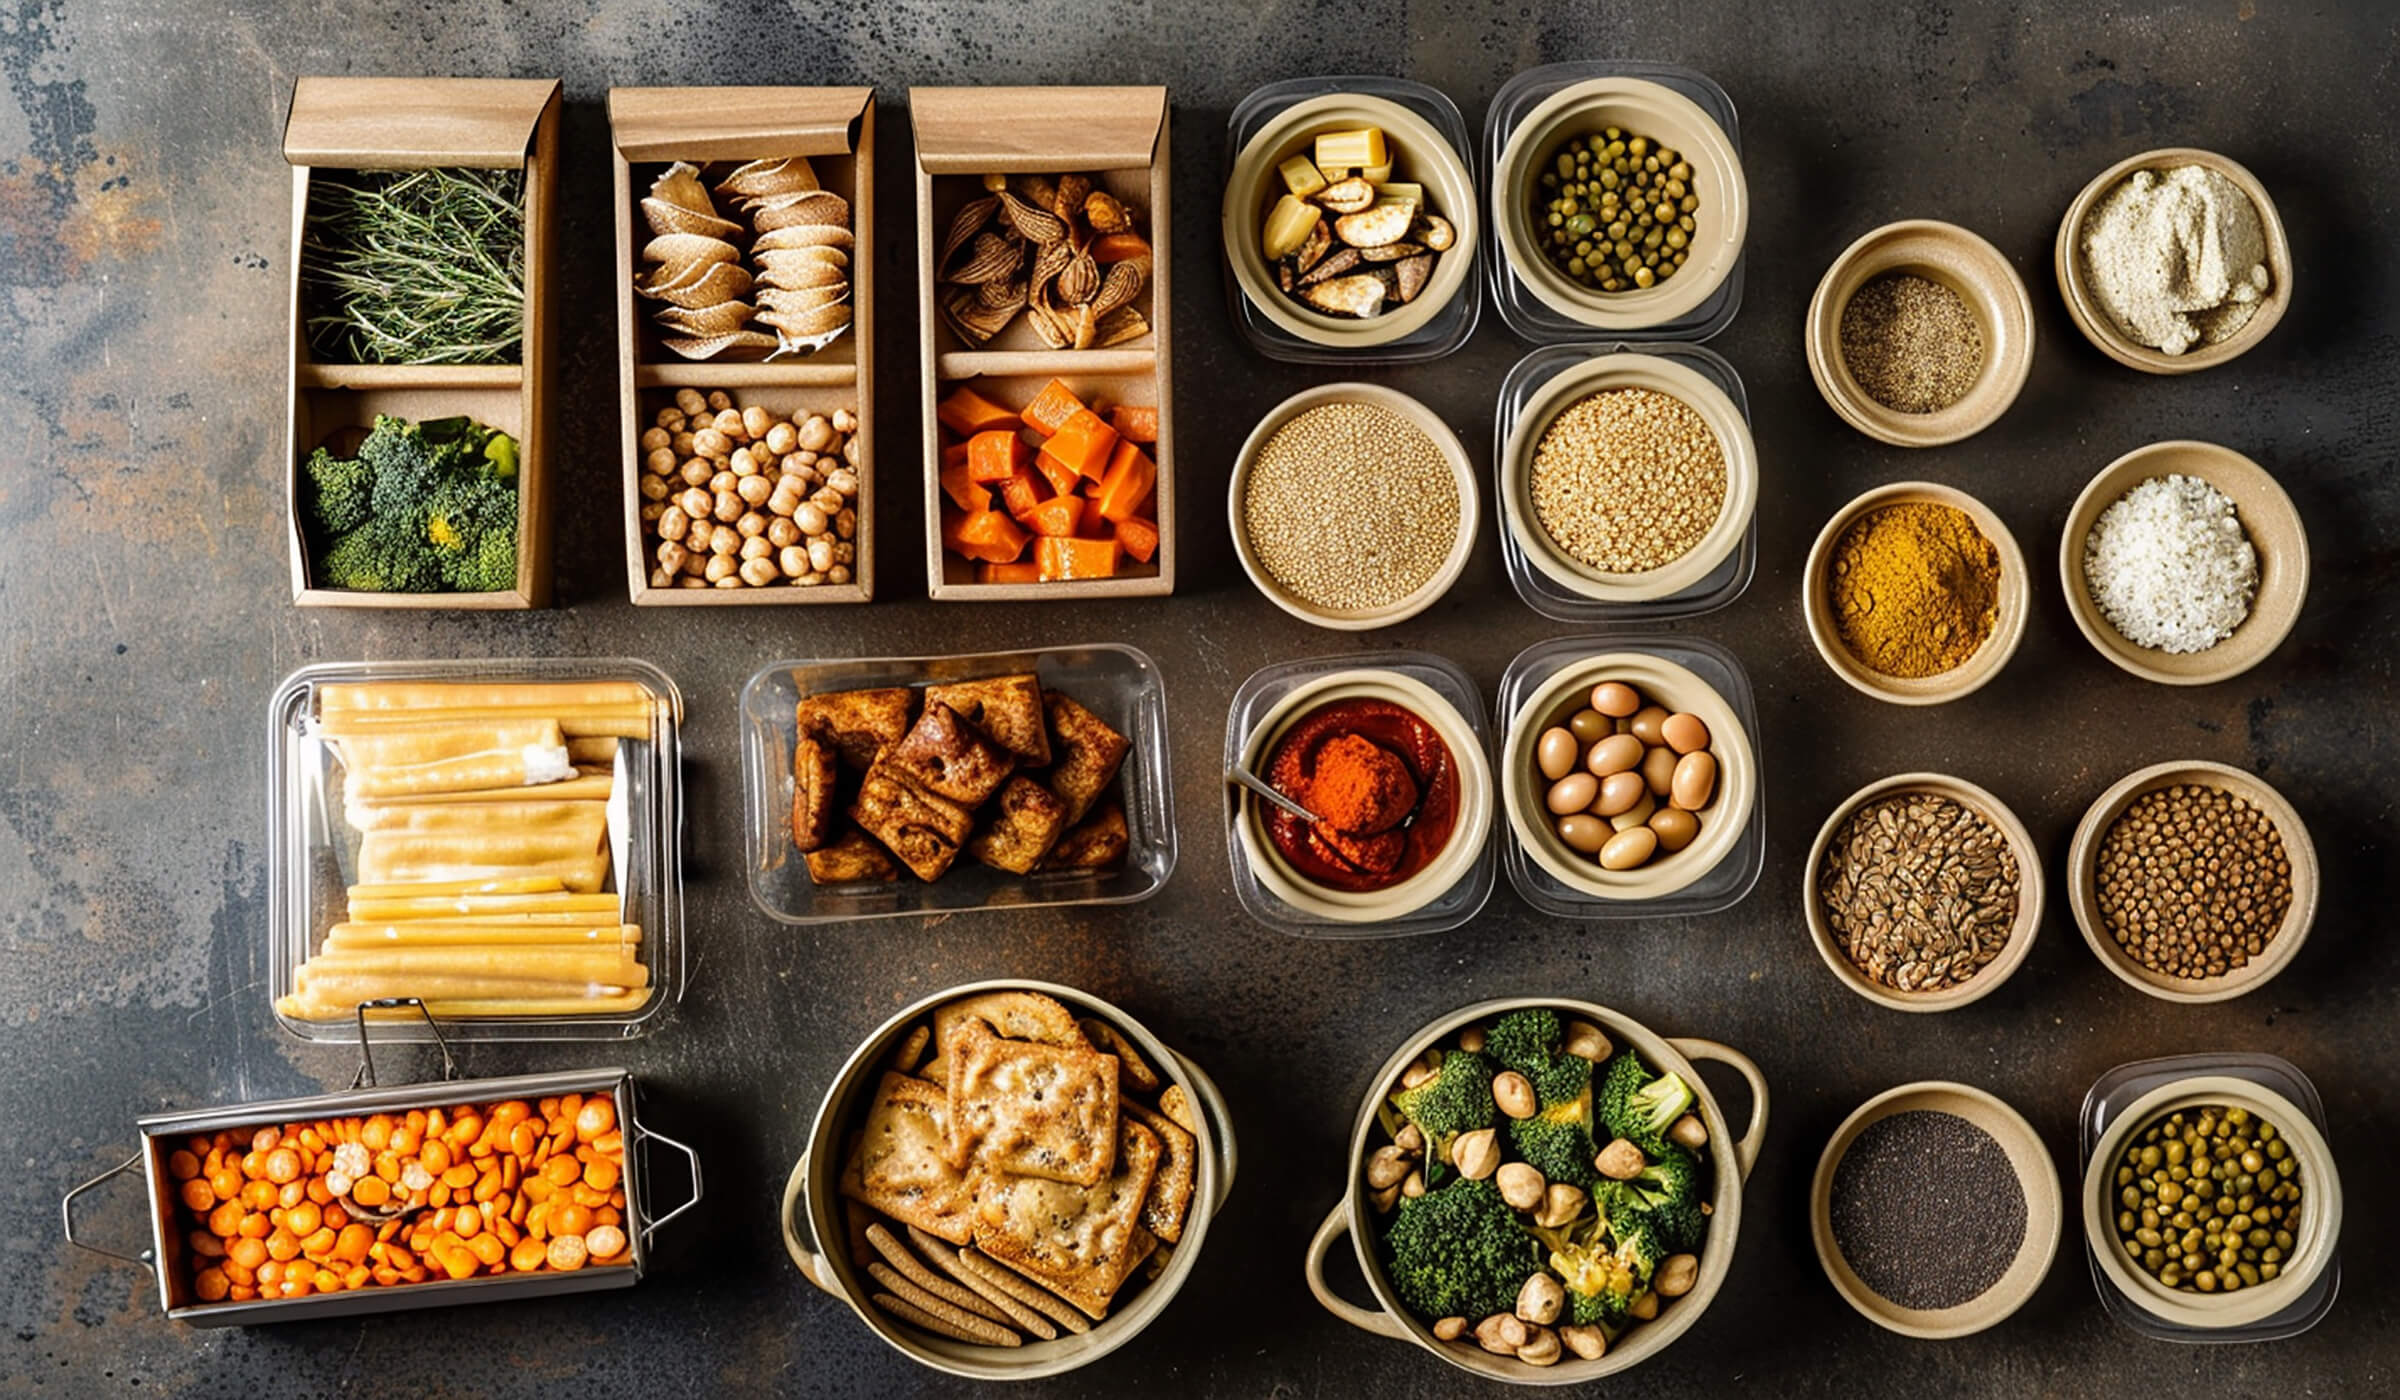 A table full of zero-waste meal kit materials